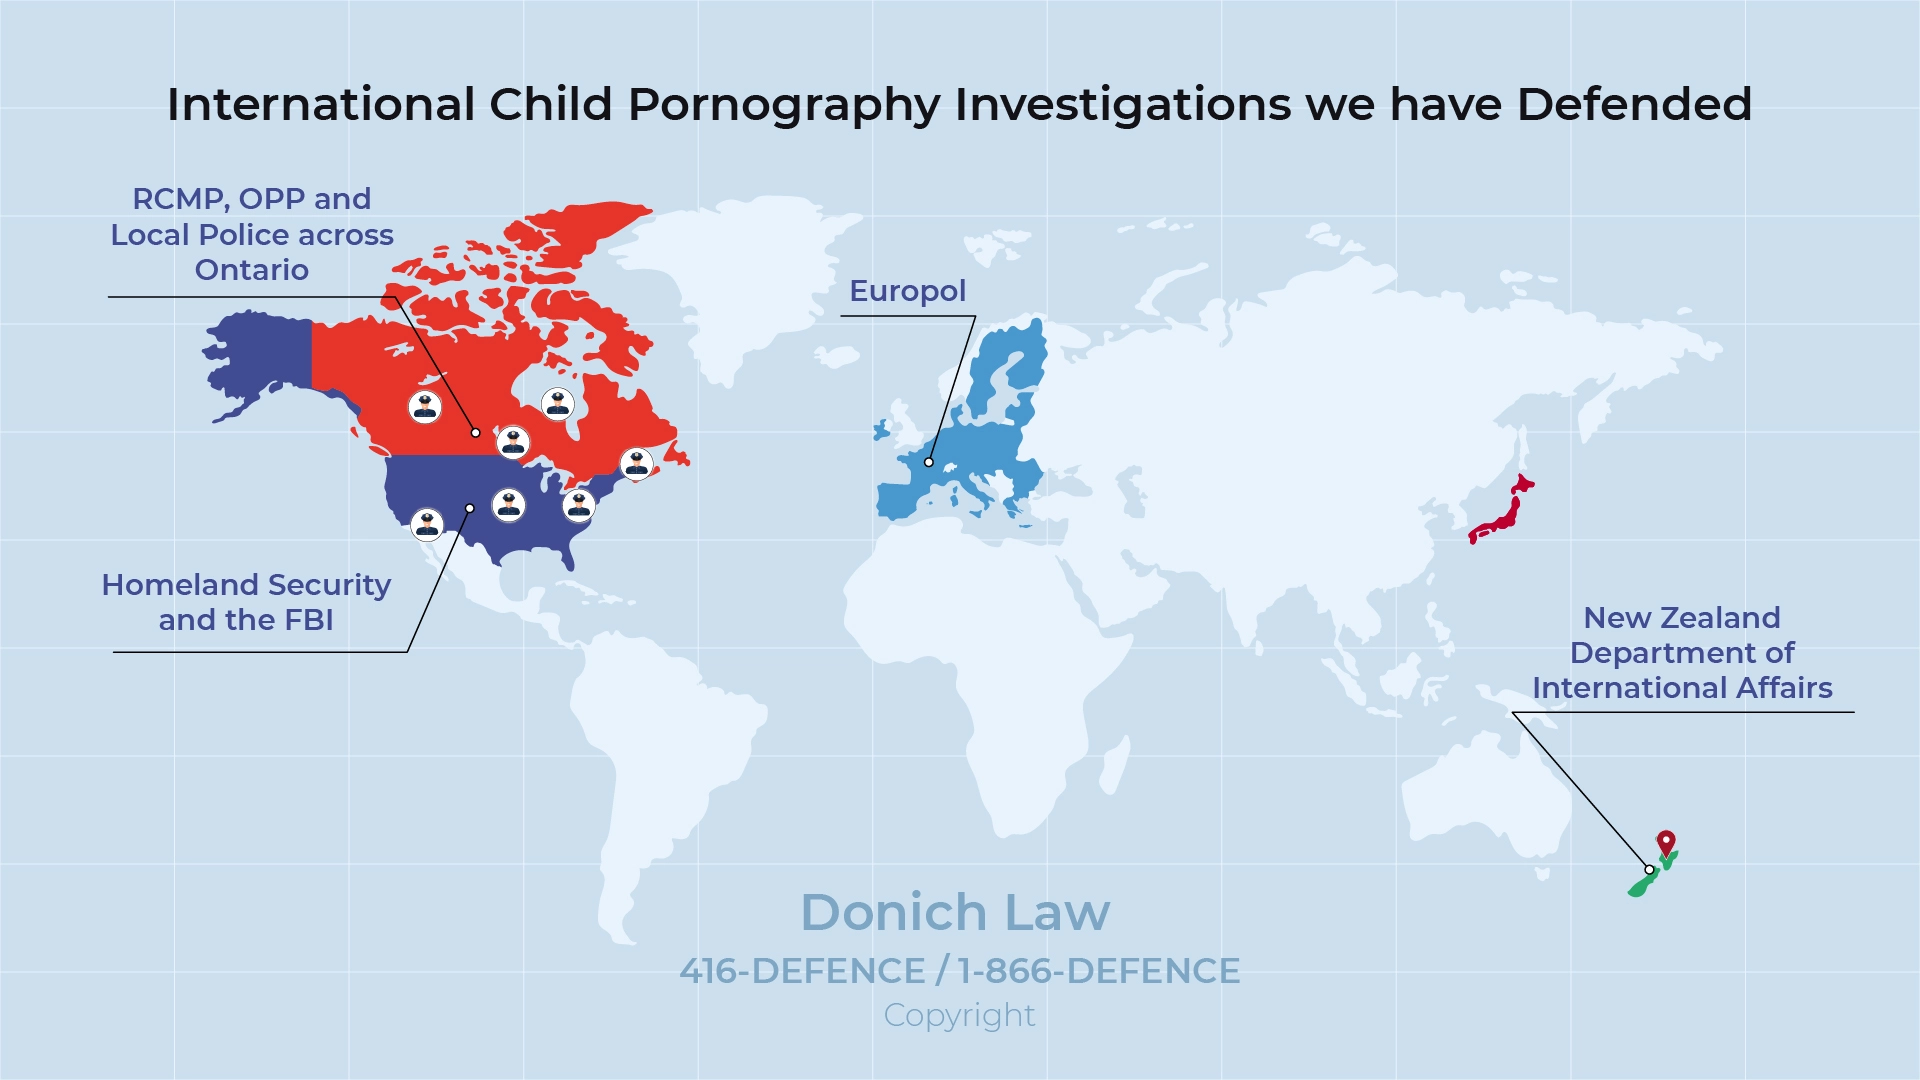 Donich Law - International Child Pornography Investigations we have Defended